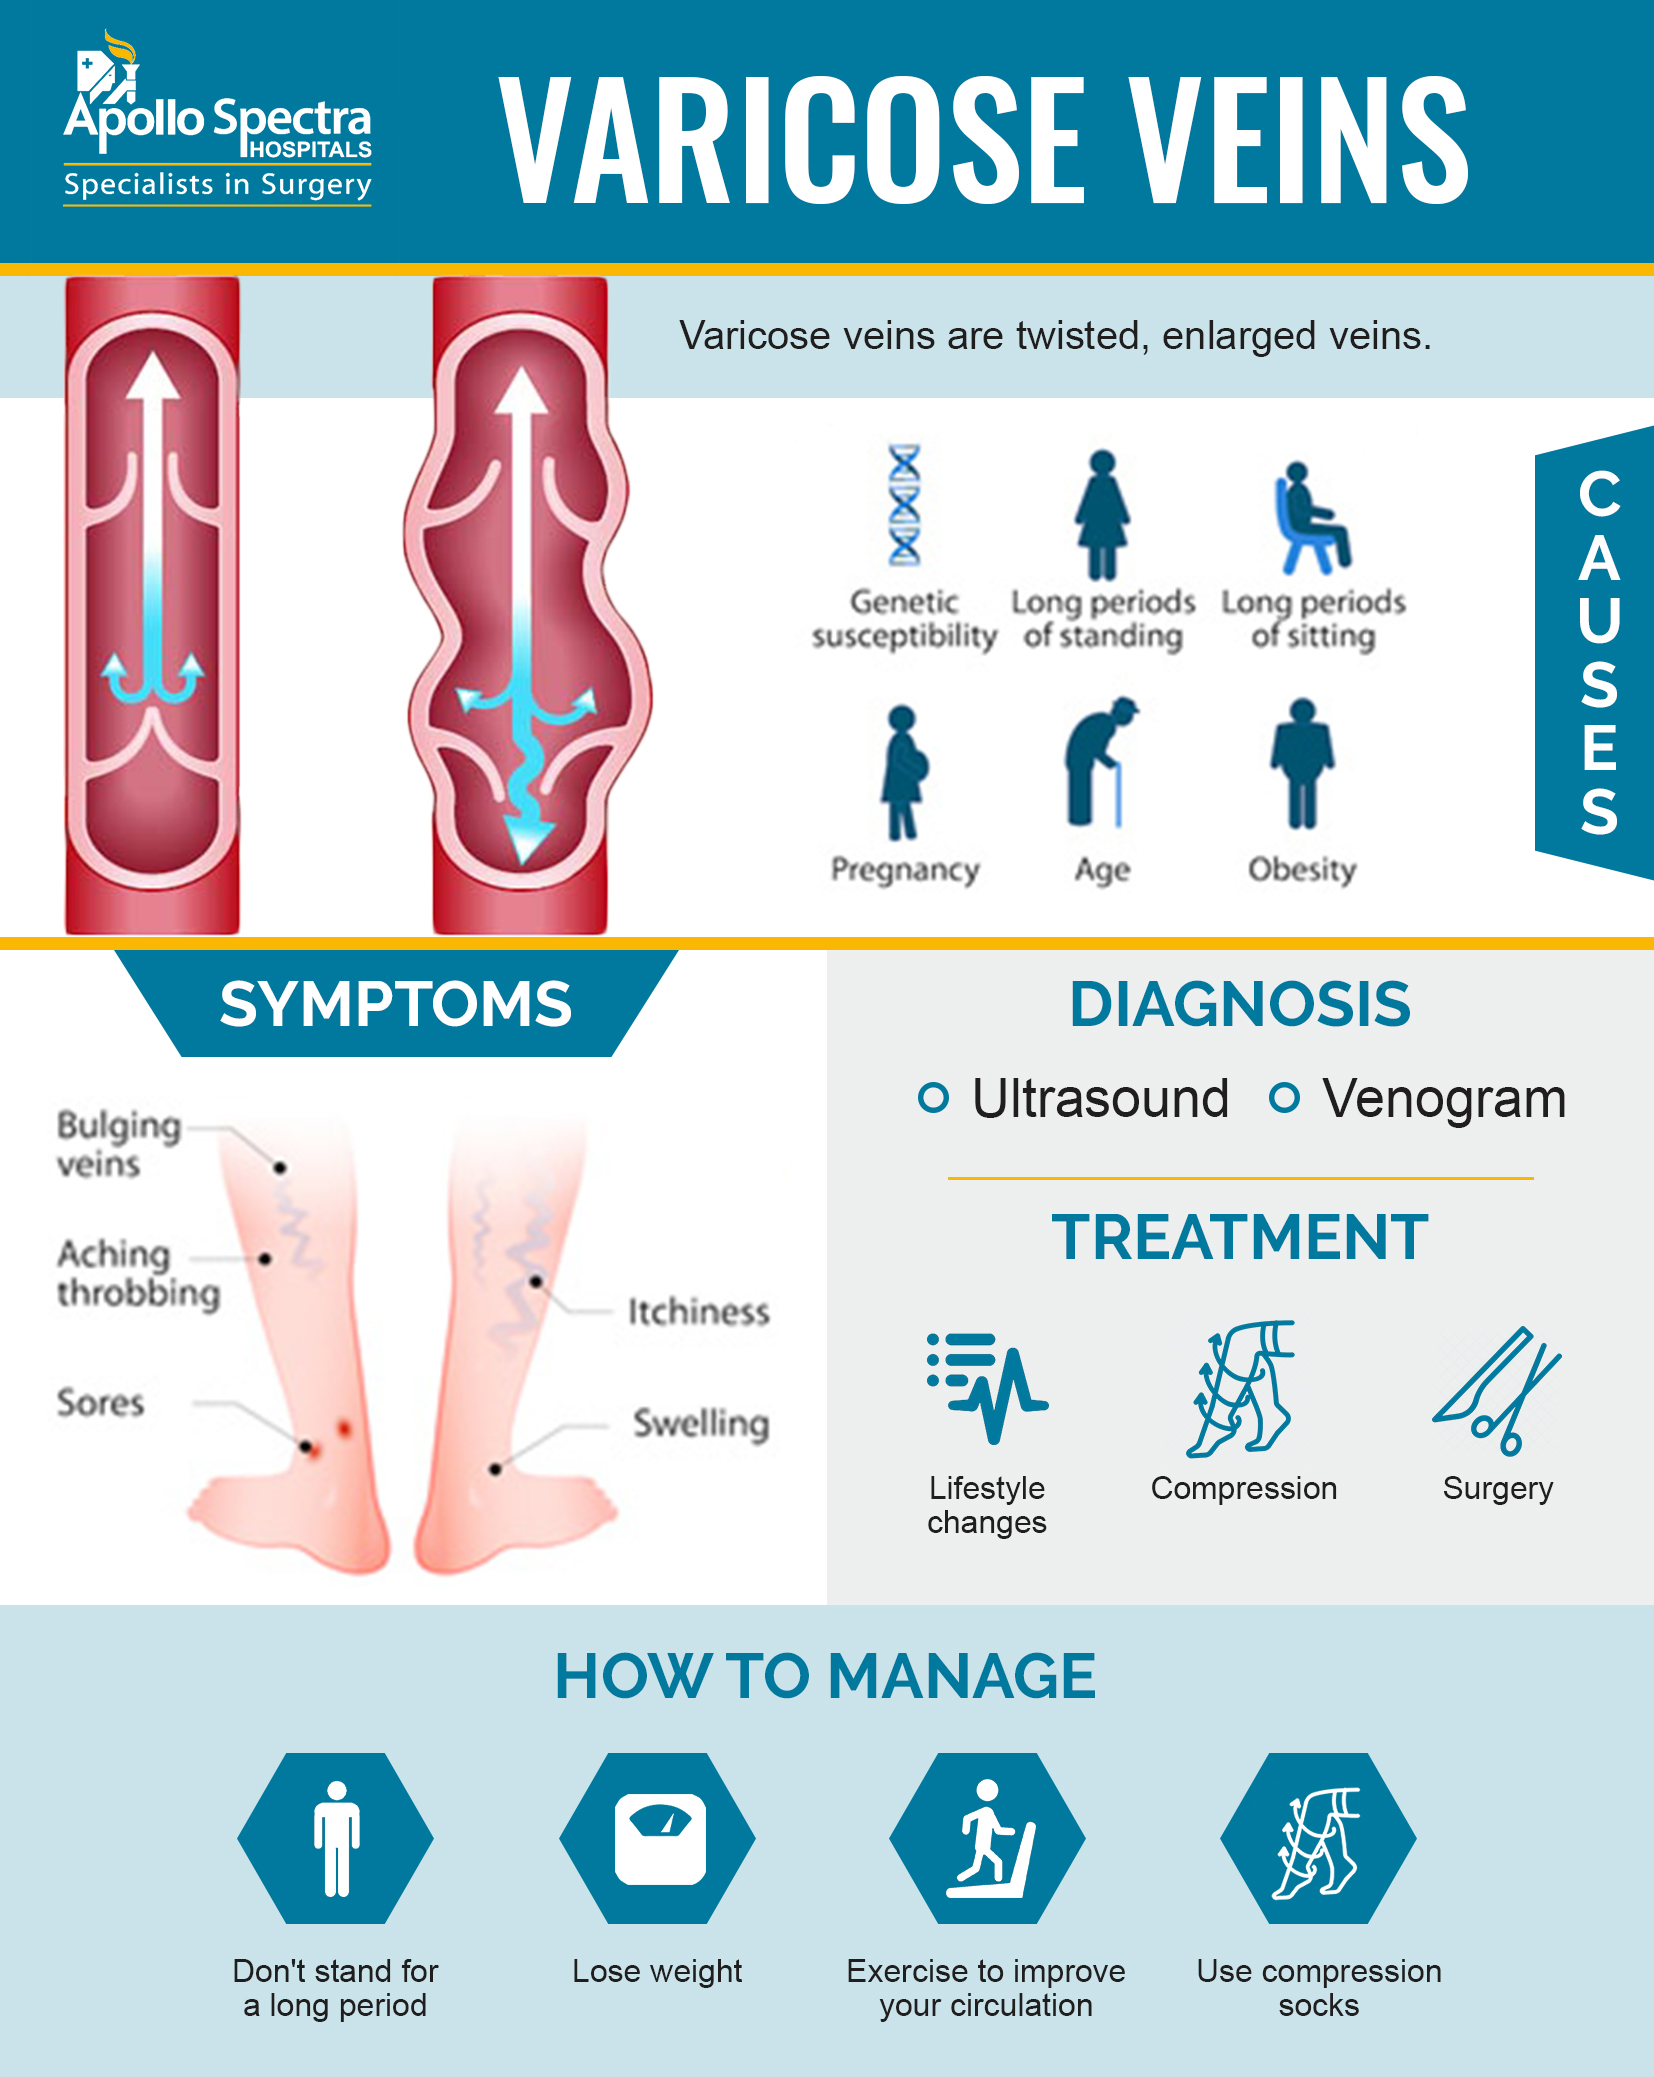 Getting Rid of Varicose Veins: Treatment and Prevention – The